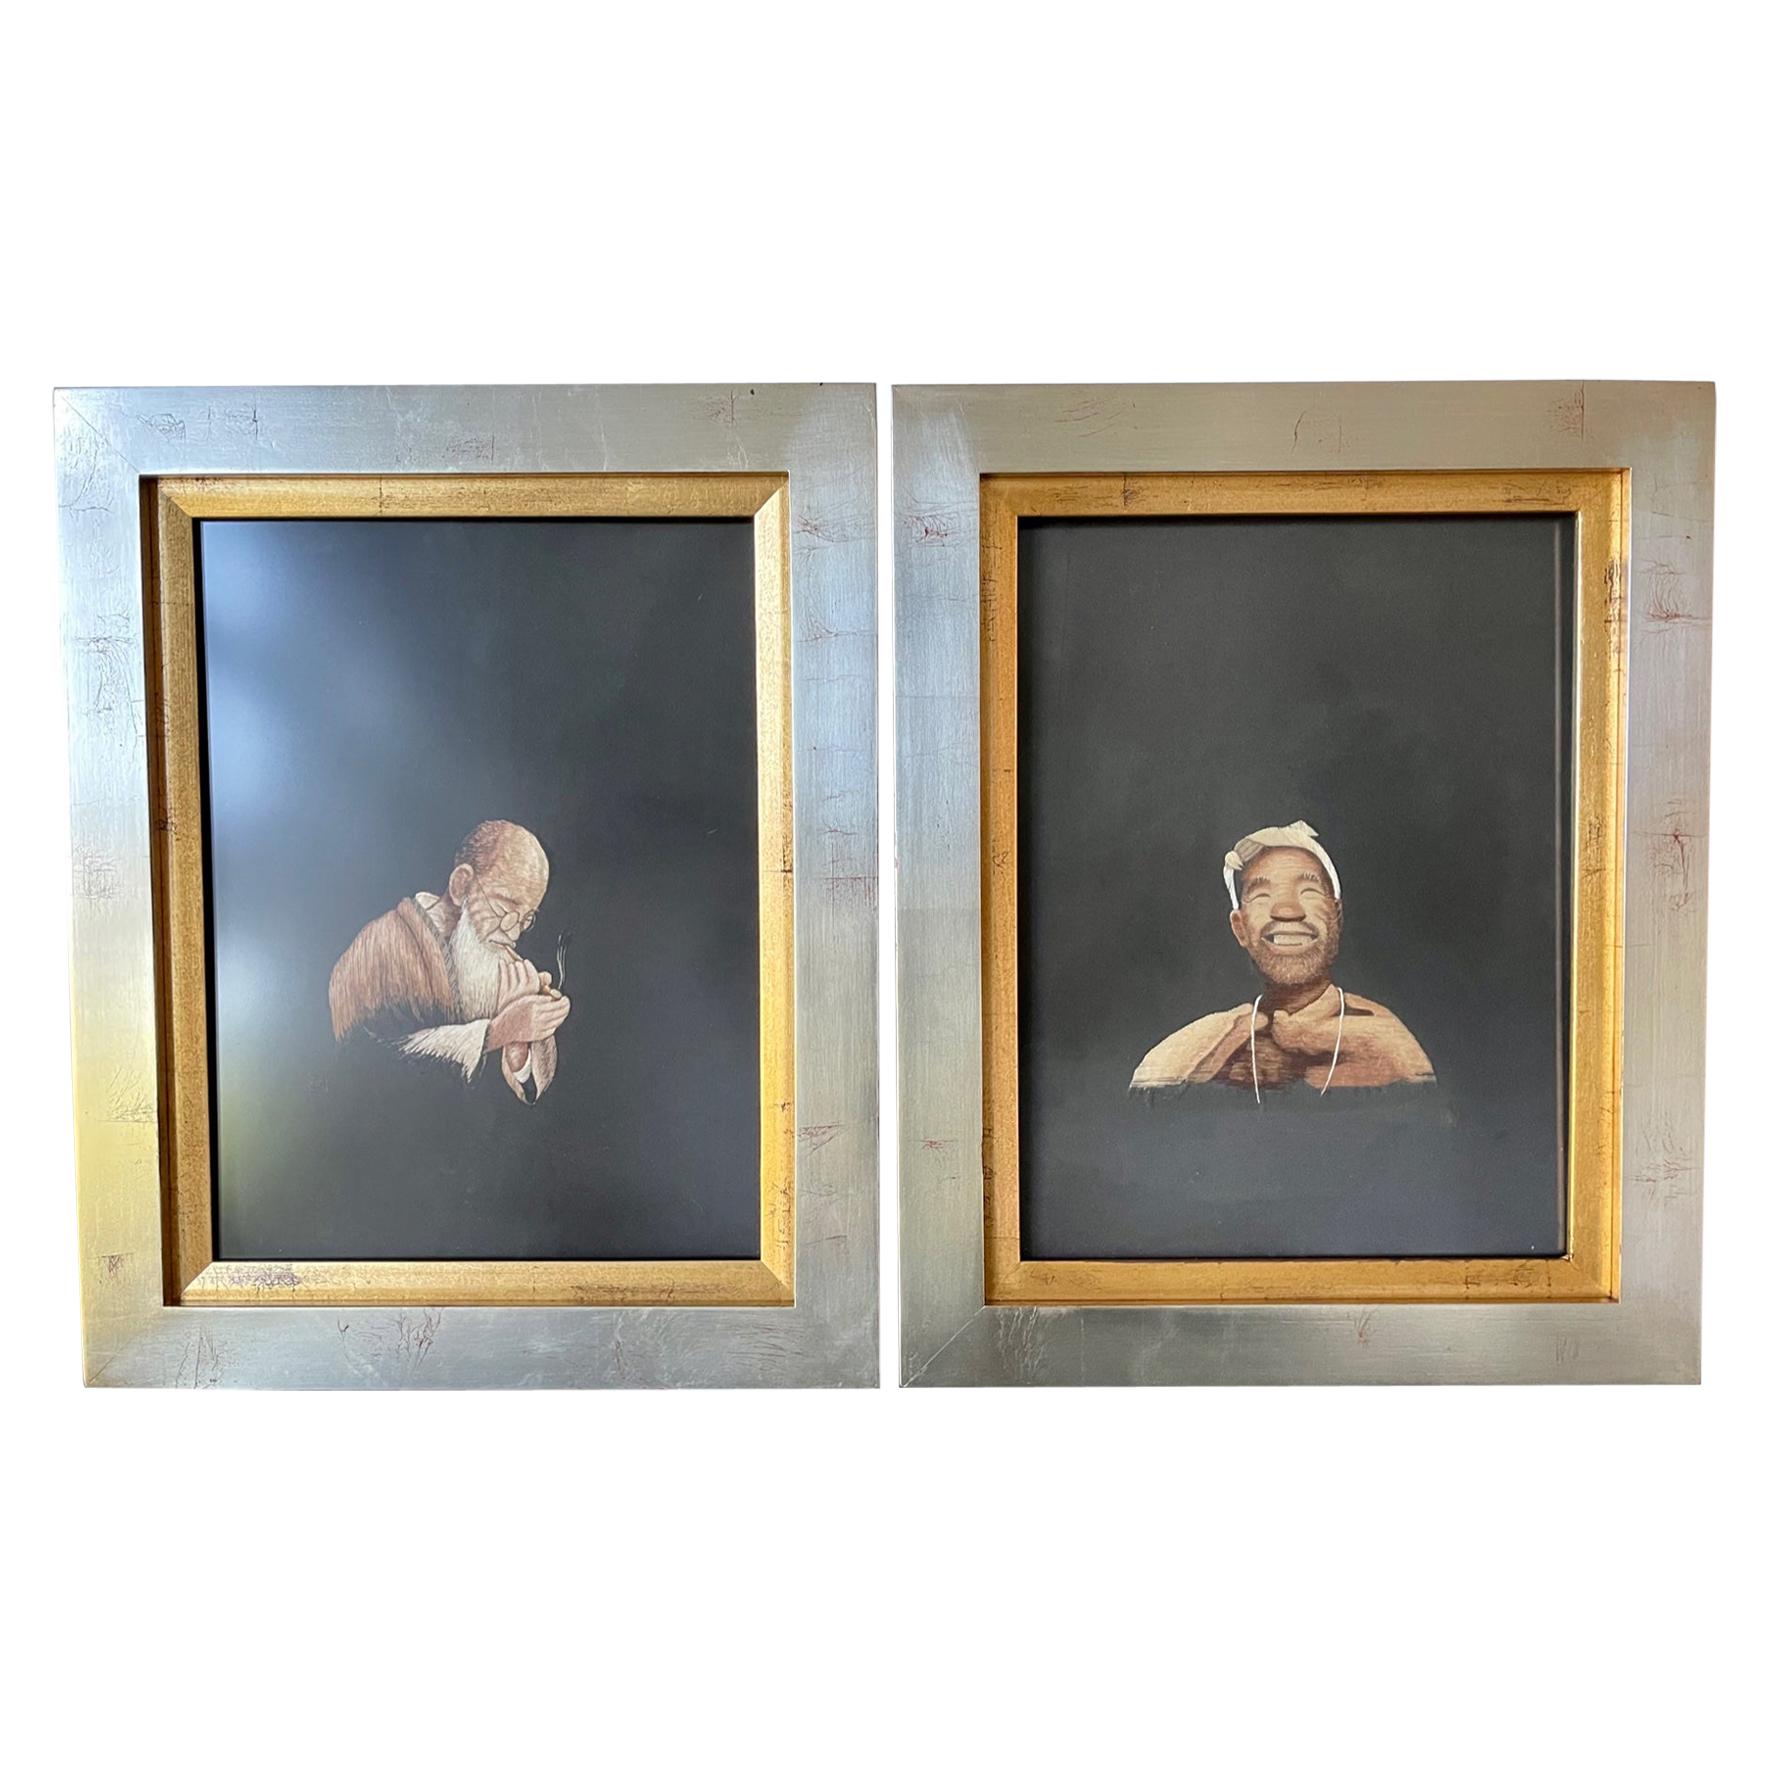 Pair of Framed Japanese Embroidery Art Portraits